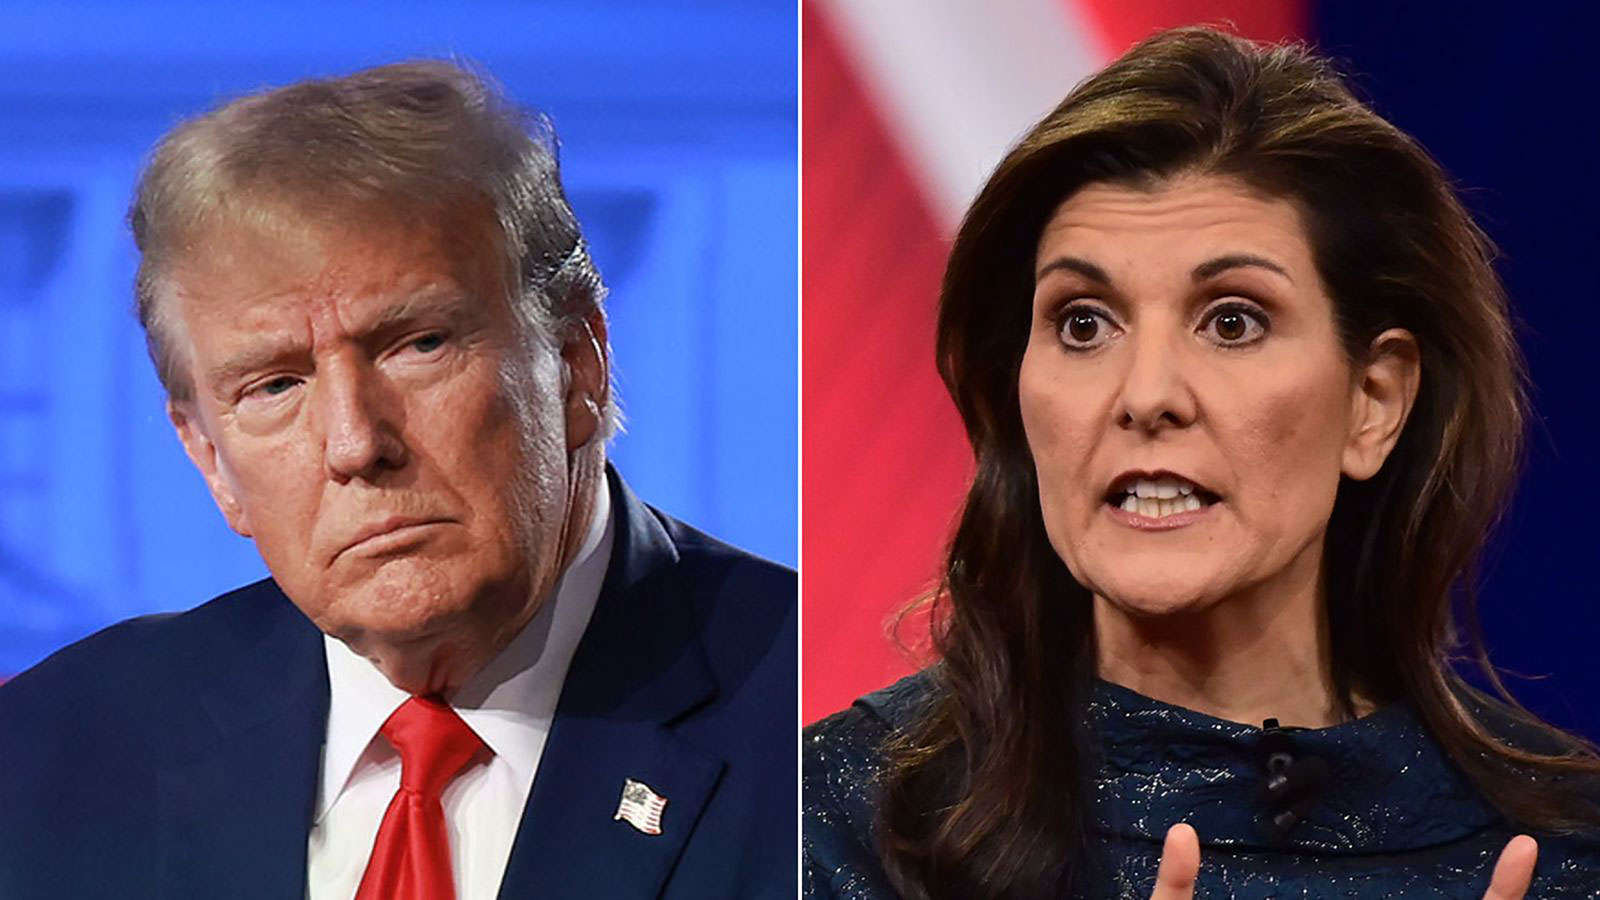 Cnns Latest New Hampshire Poll Shows Trumps Widening Lead Over Haley Ahead Of Primary